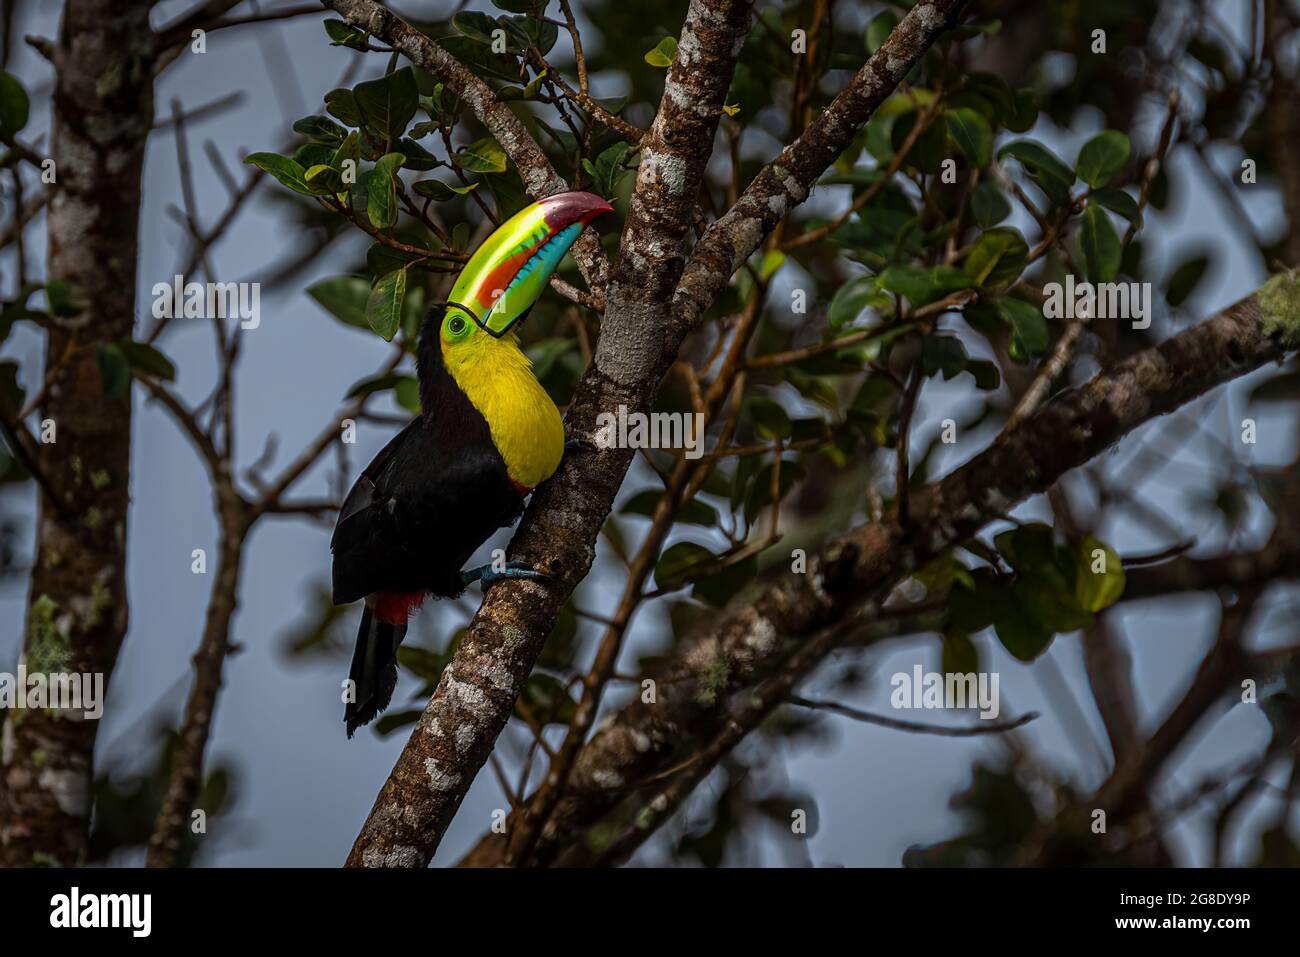 Keel-billed toucan (Ramphastos sulfuratus), also known as sulfur-breasted toucan or rainbow-billed toucan. Stock Photo